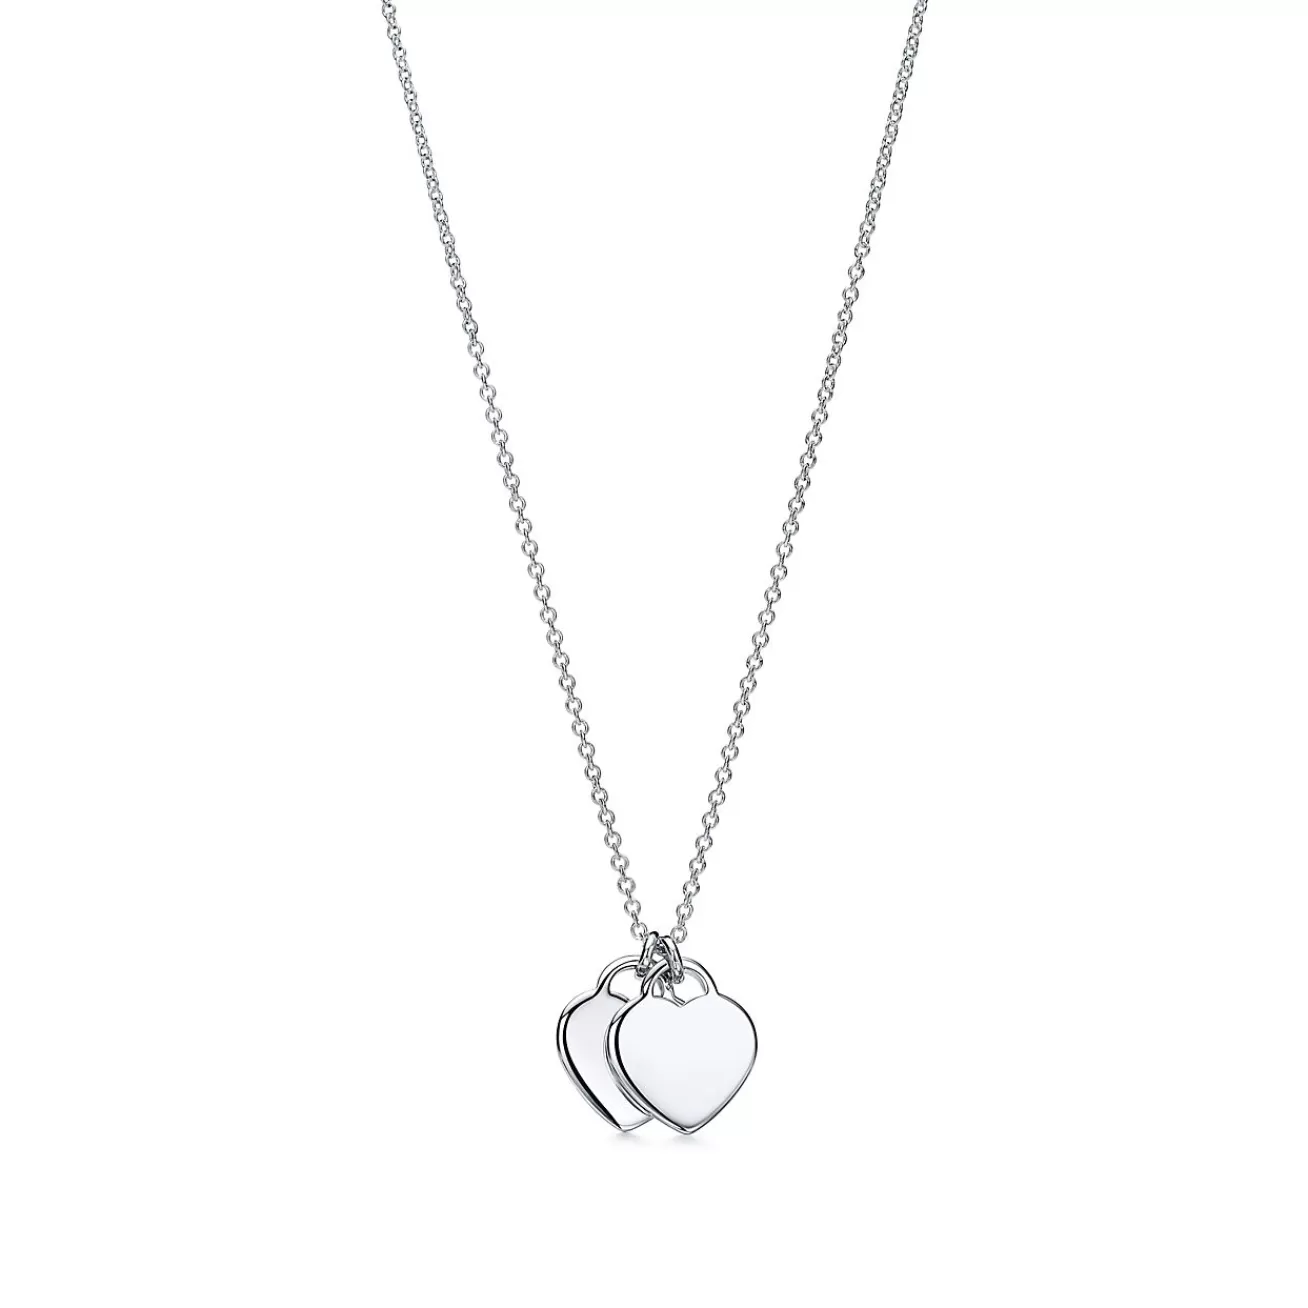 Tiffany & Co. Return to Tiffany™ mini double heart tag pendant in silver with Tiffany Blue enamel finish. | ^ Necklaces & Pendants | Gifts for Her